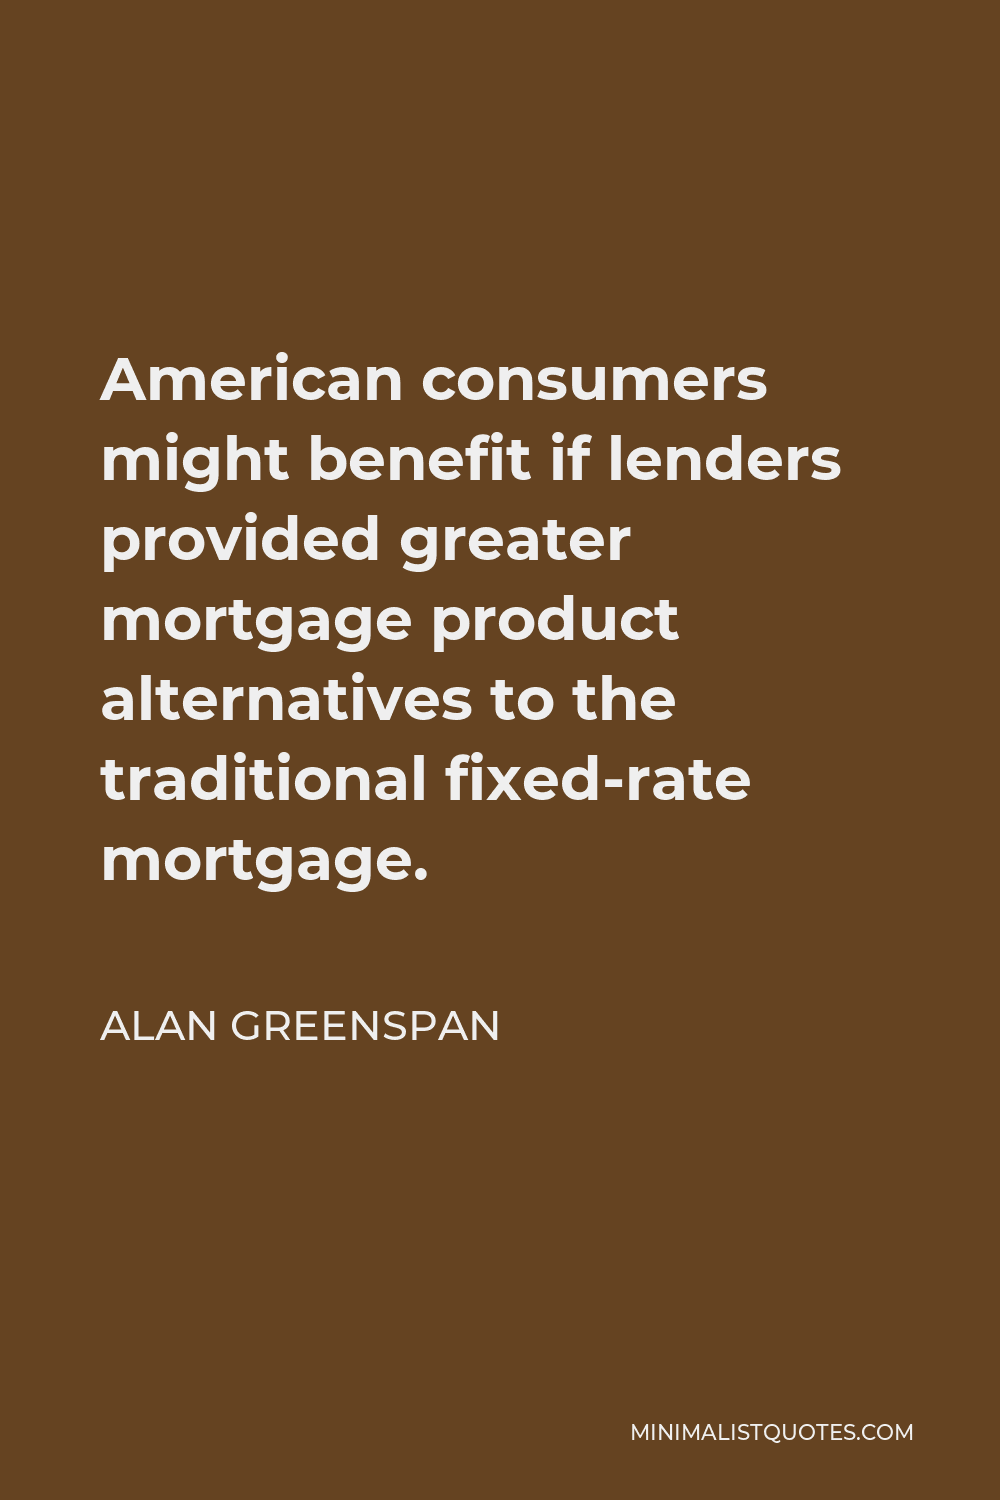 Alan Greenspan Quote - American consumers might benefit if lenders provided greater mortgage product alternatives to the traditional fixed-rate mortgage.